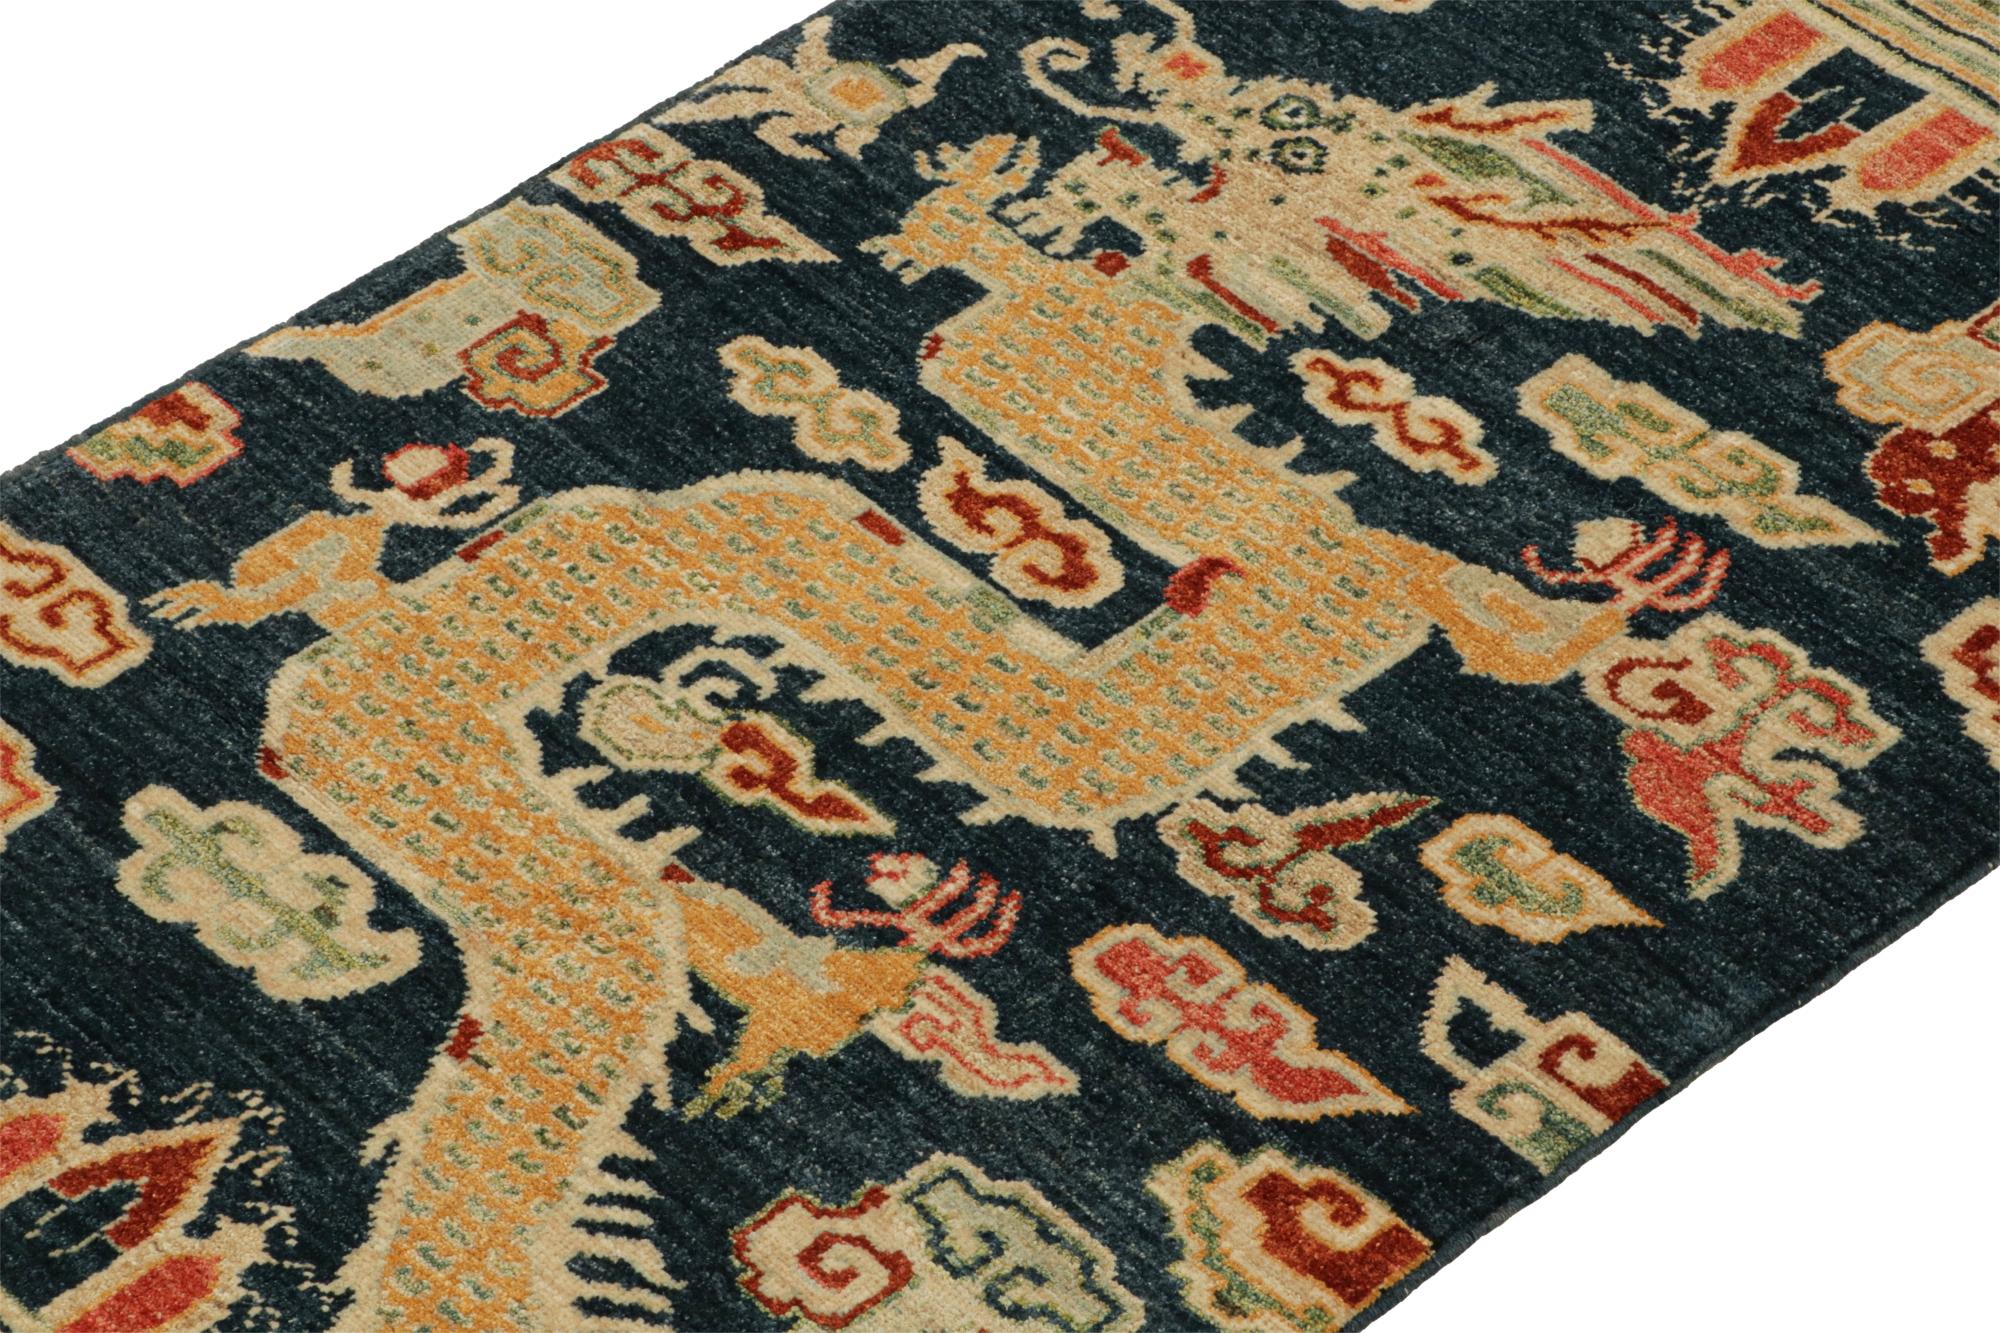 Latest to join Rug & Kilim’s Modern Classics collection is this 3x6 pictorial runner. hand-knotted in wool, the piece is inspired by antique Chinese masterpieces. 

Further on the Design:

This custom runner enjoys a gold dragon pictorial on